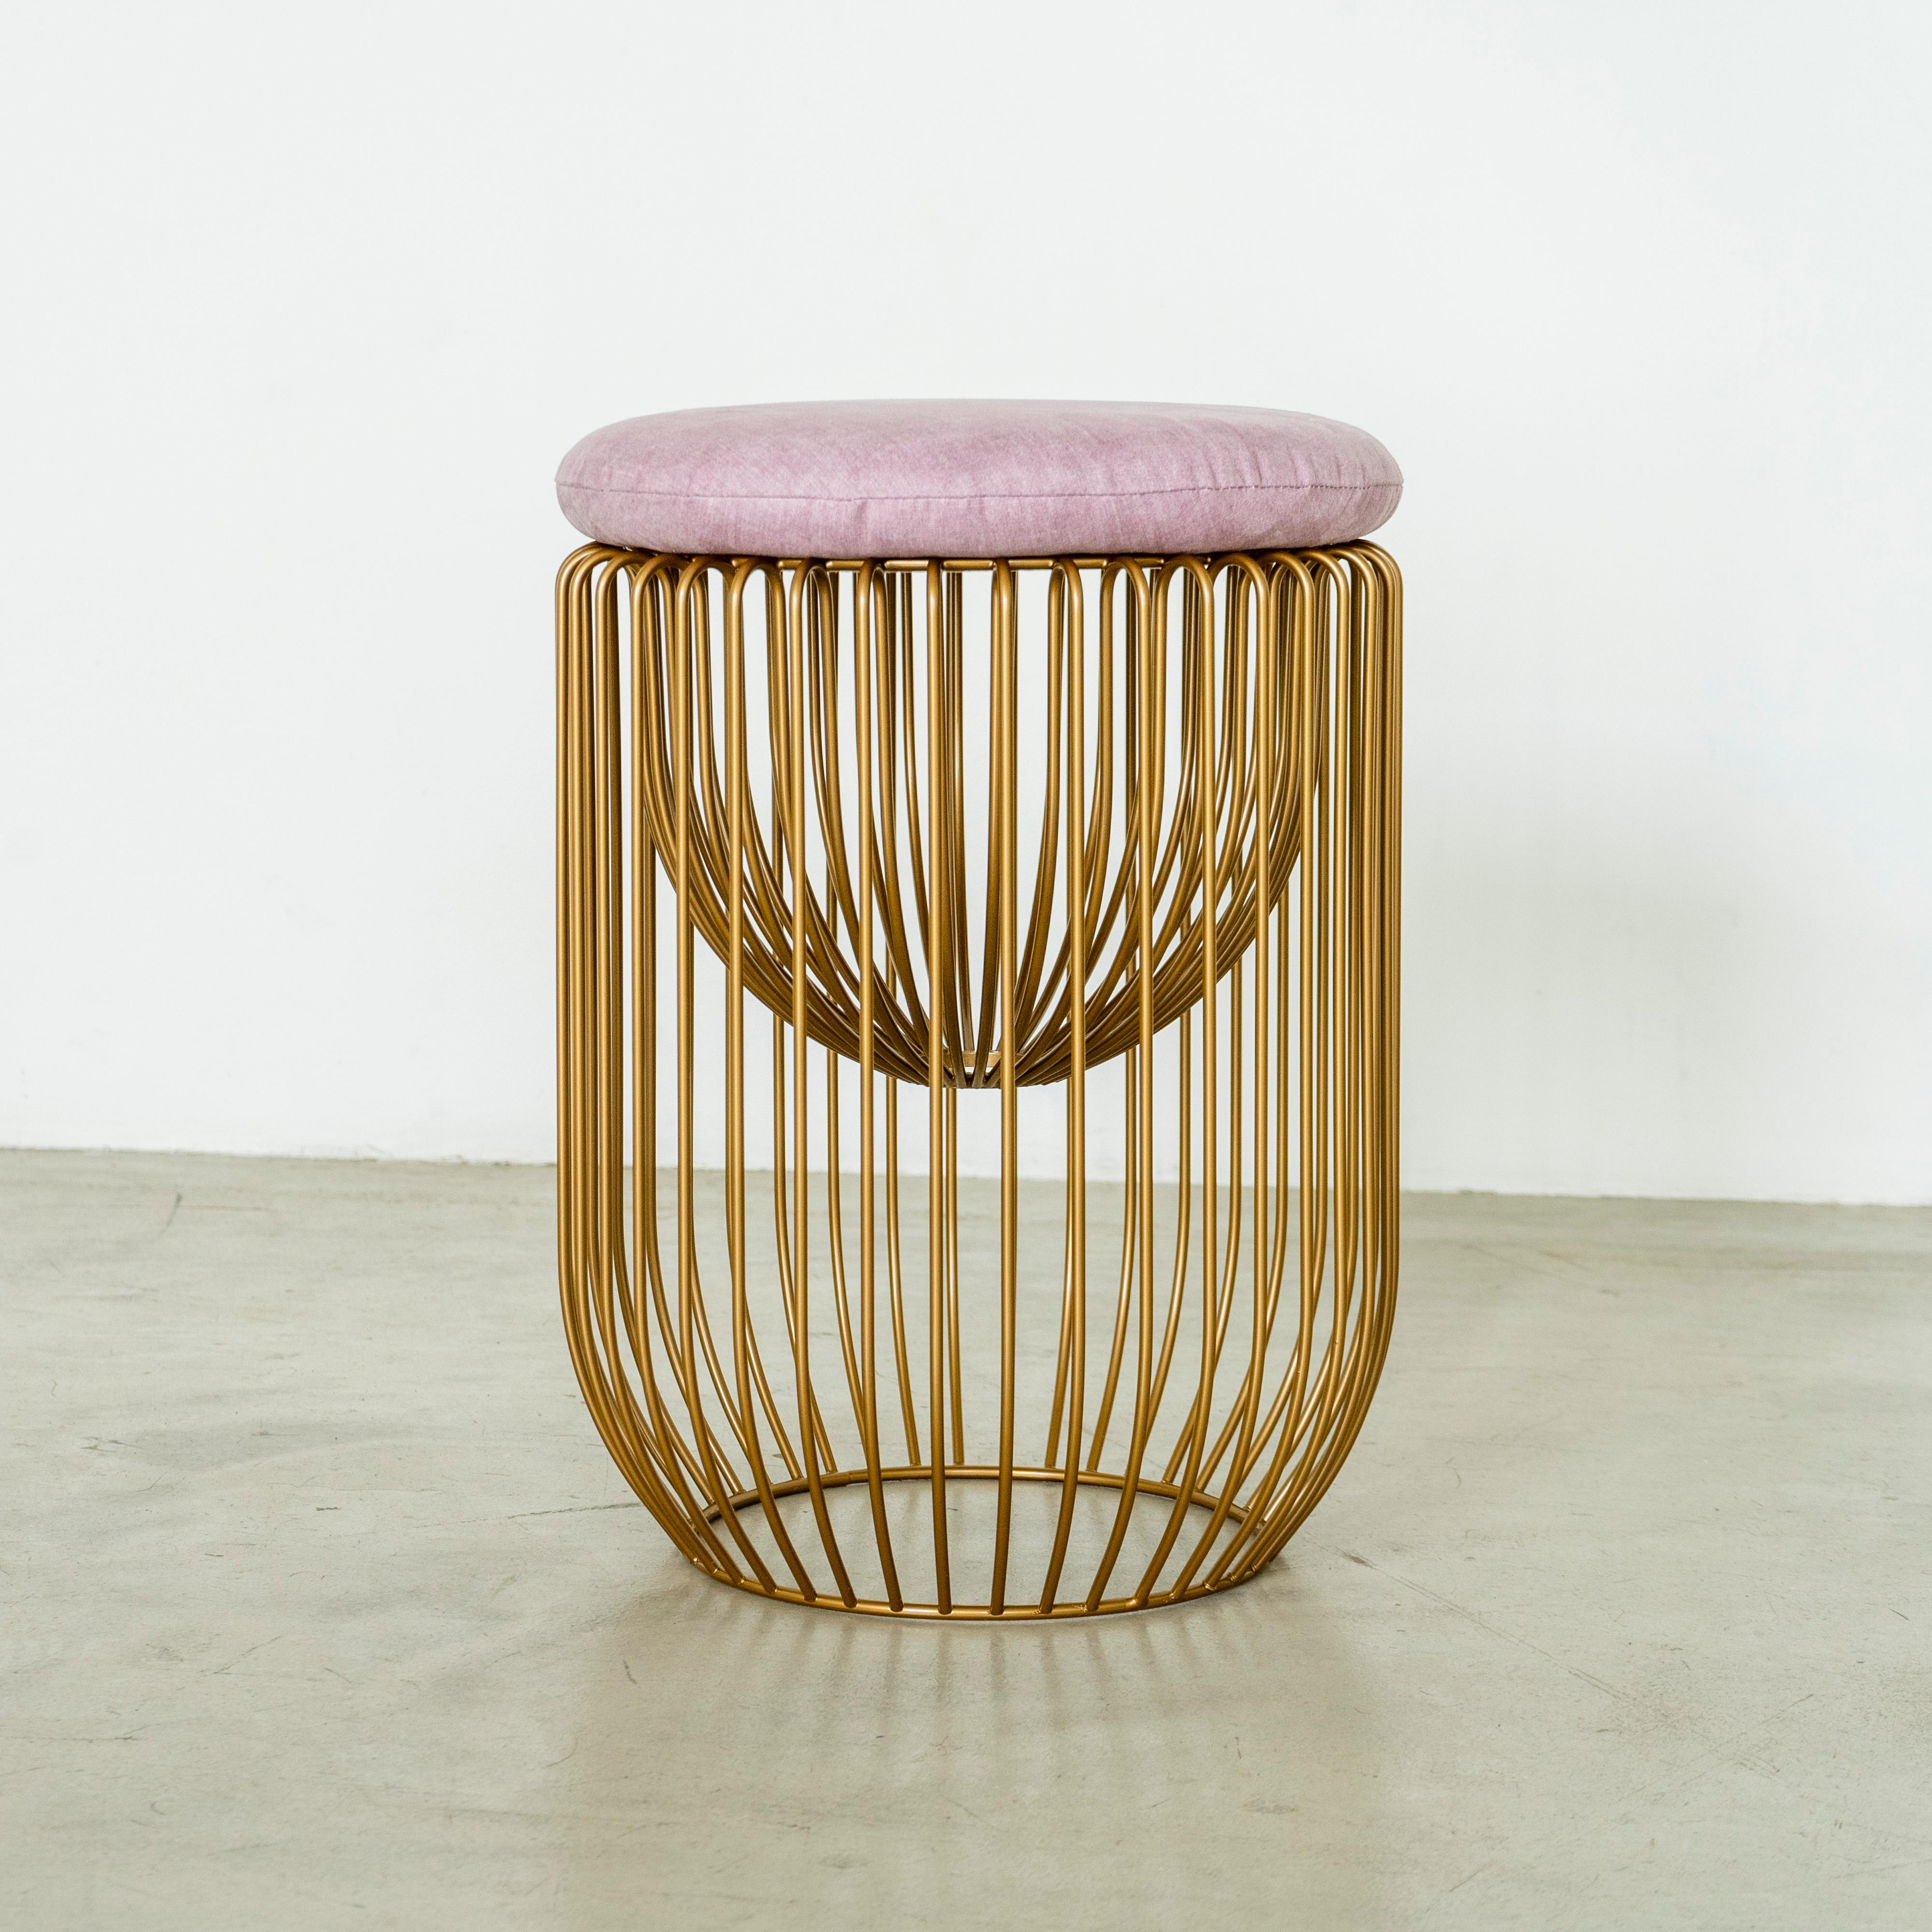 Italian Nido Stool with Upholstered Pillow in Pink